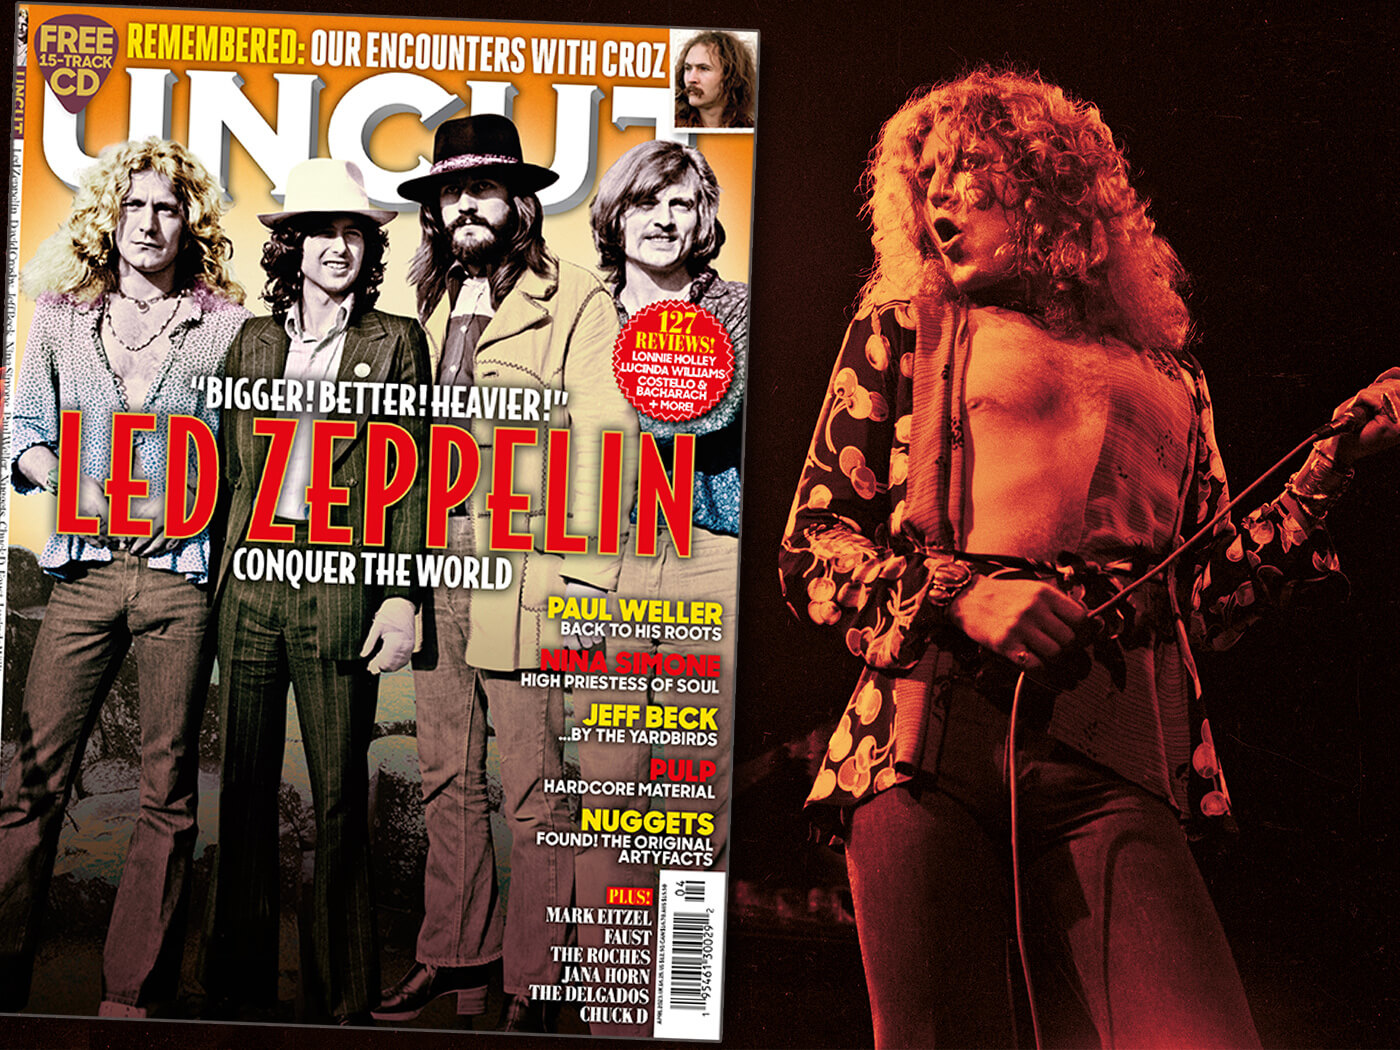 Revisiting Led Zeppelin's rise to the top in 1973